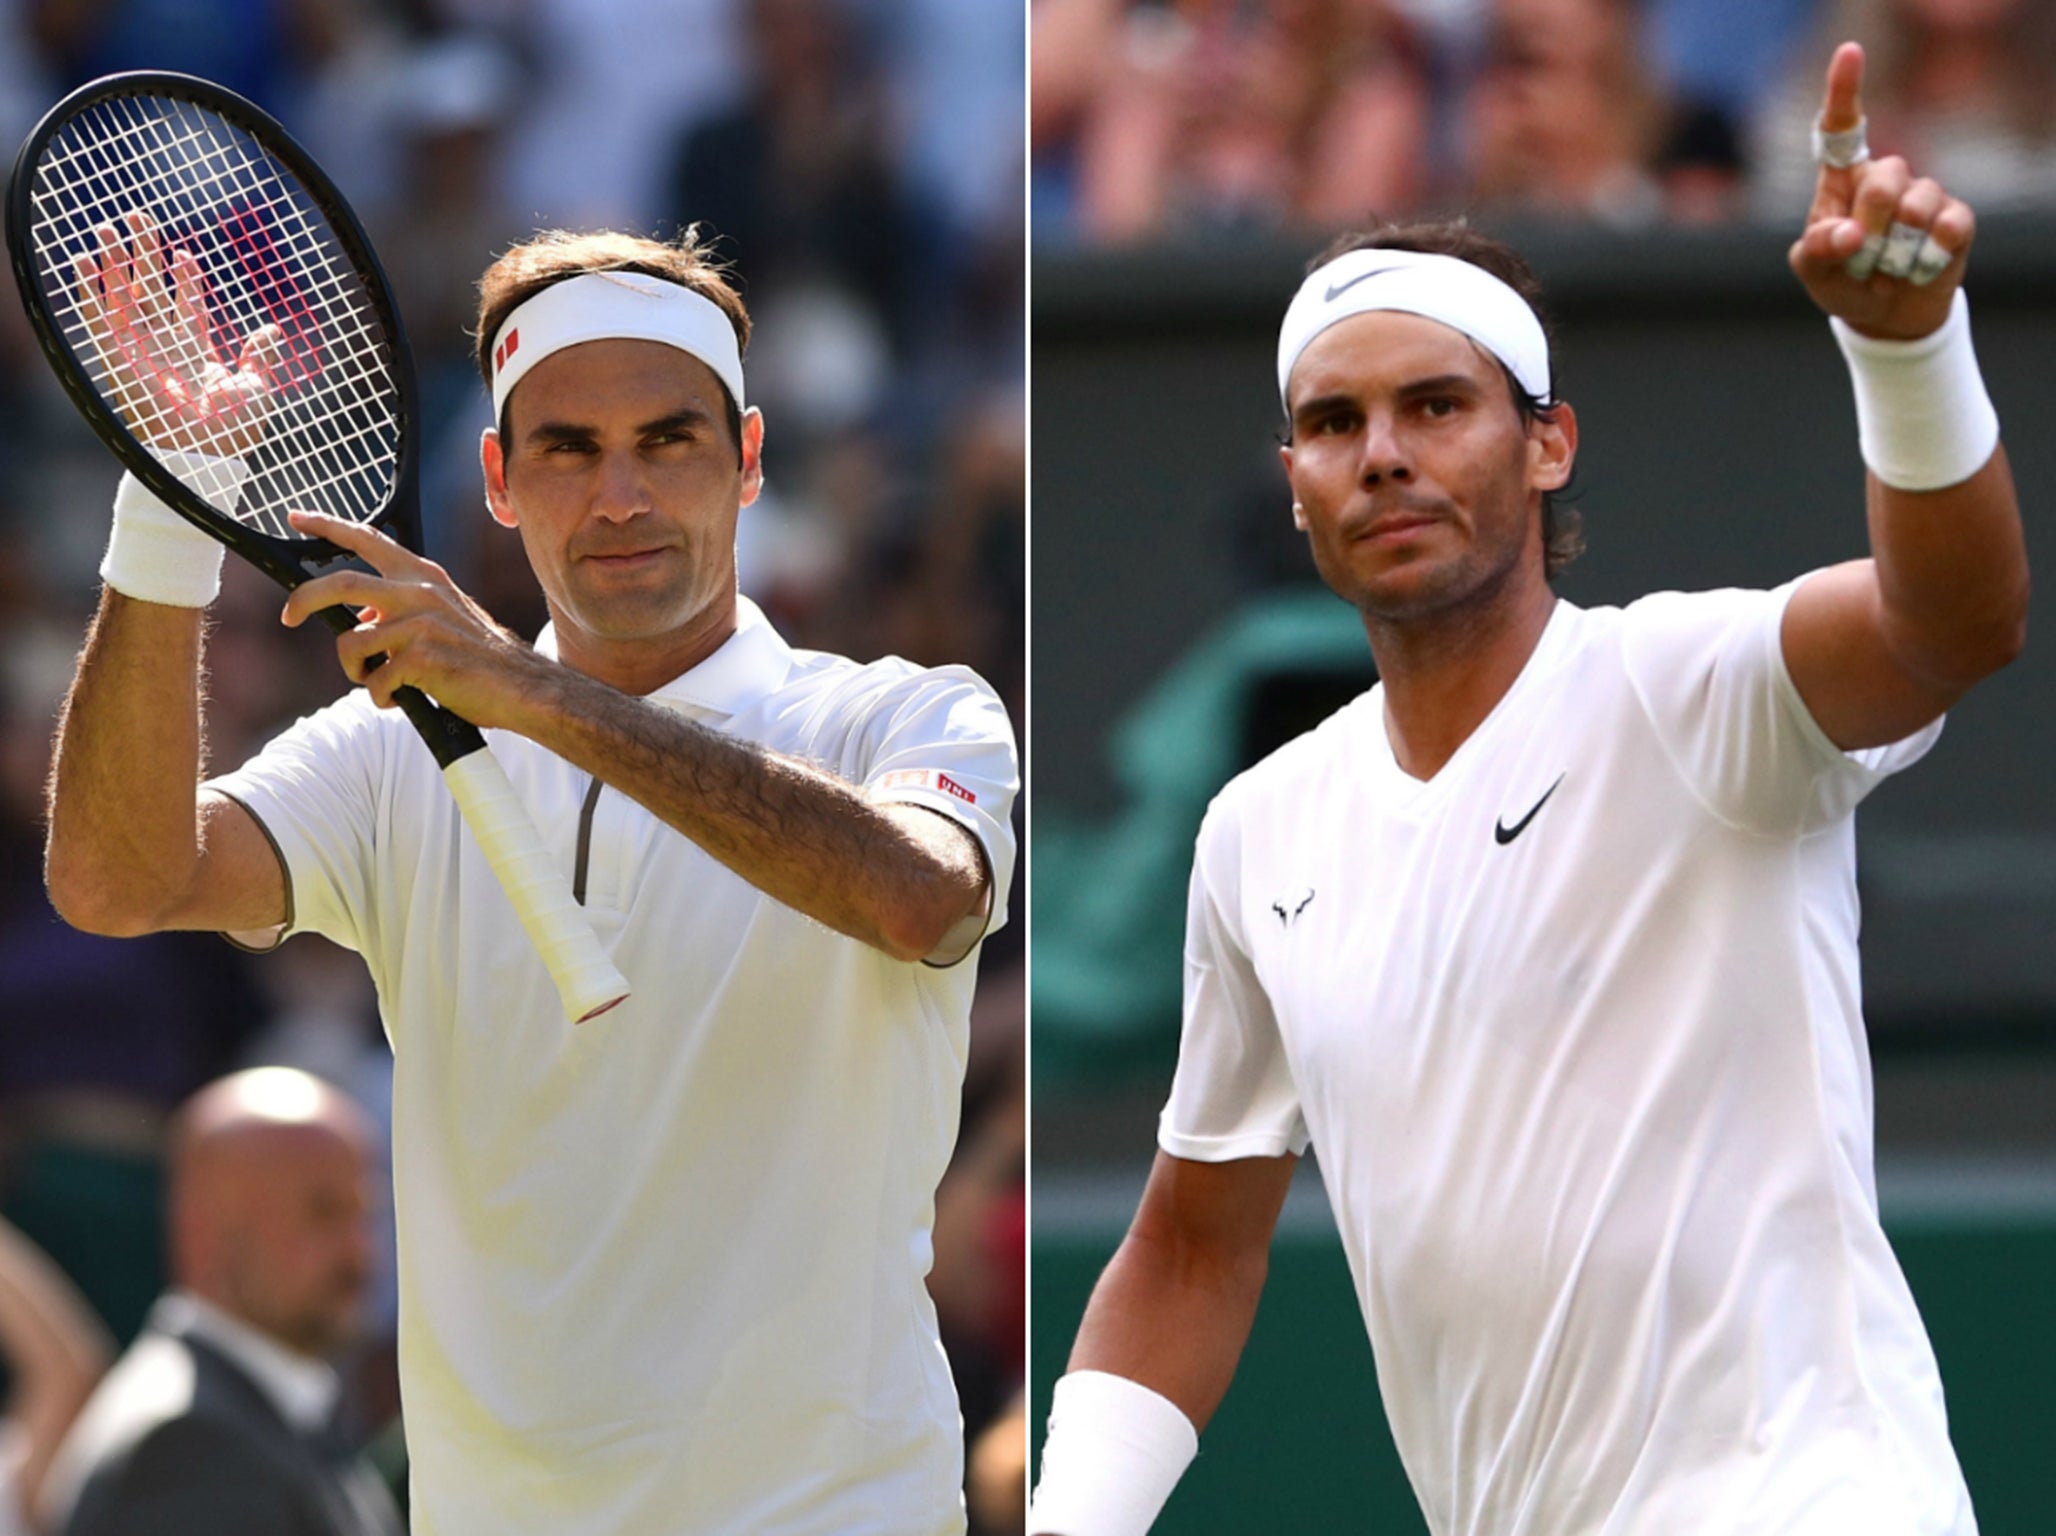 Wimbledon 2019: Roger Federer and Rafael Nadal remain on collision course after contrasting days